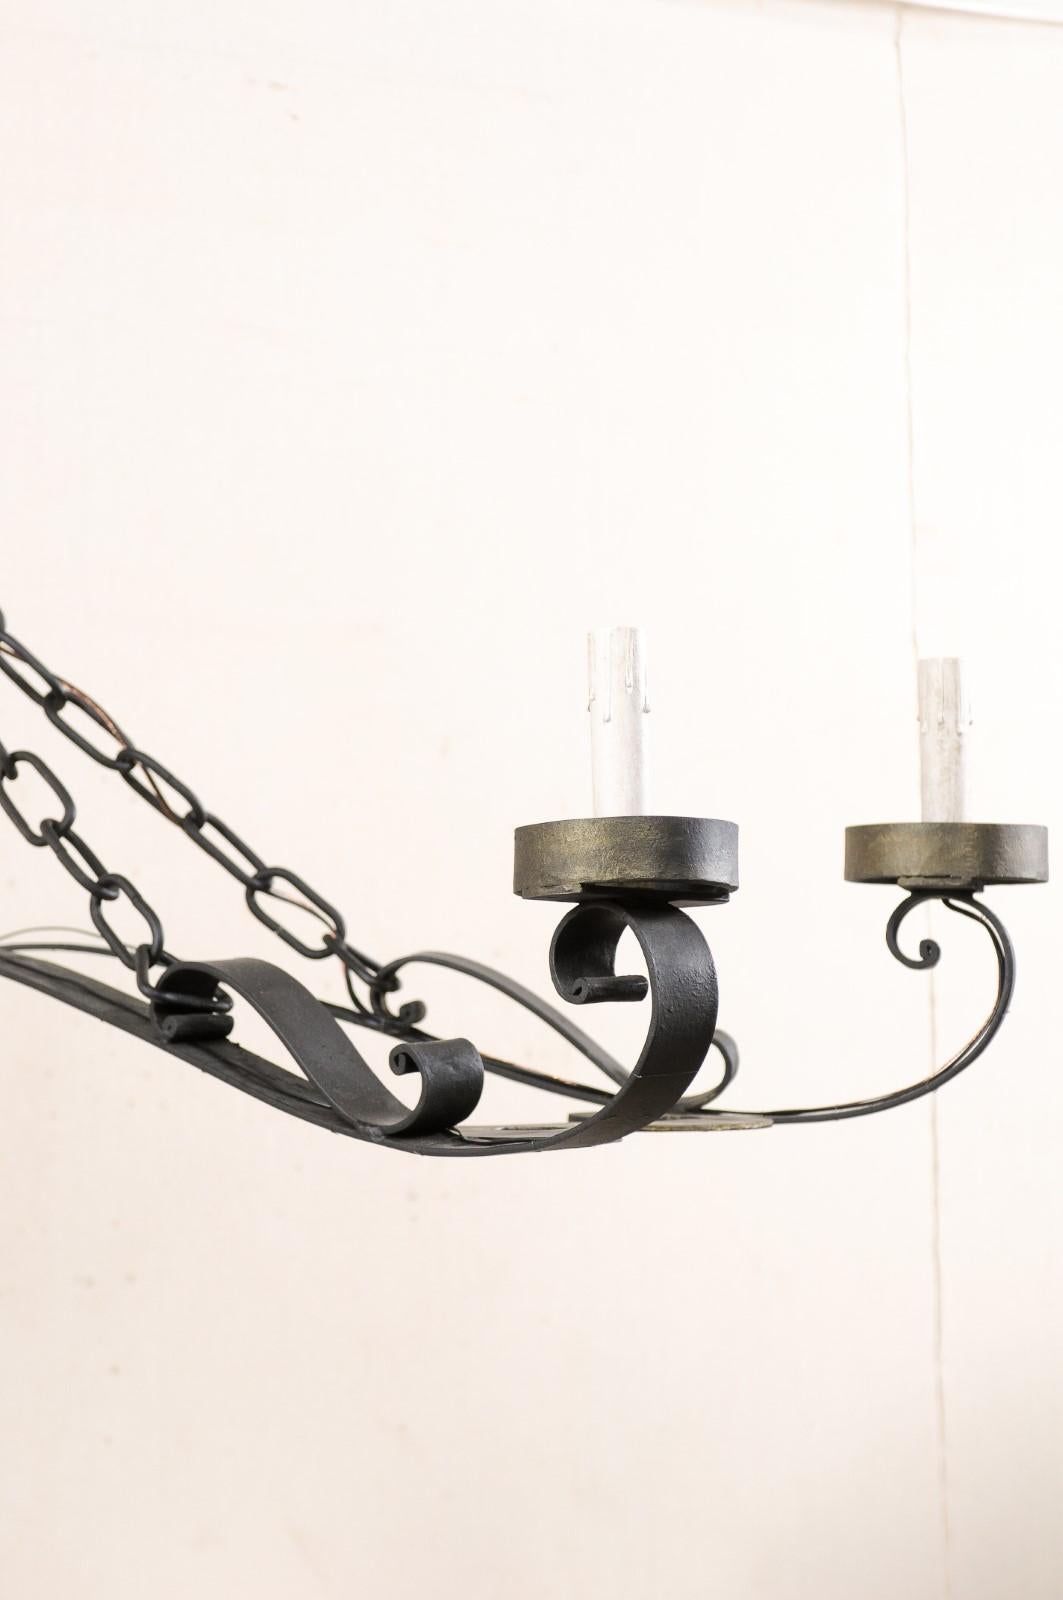 An Elegant French Wrought Iron Chandelier a Great Large Size of 5+ Ft in Length! 2